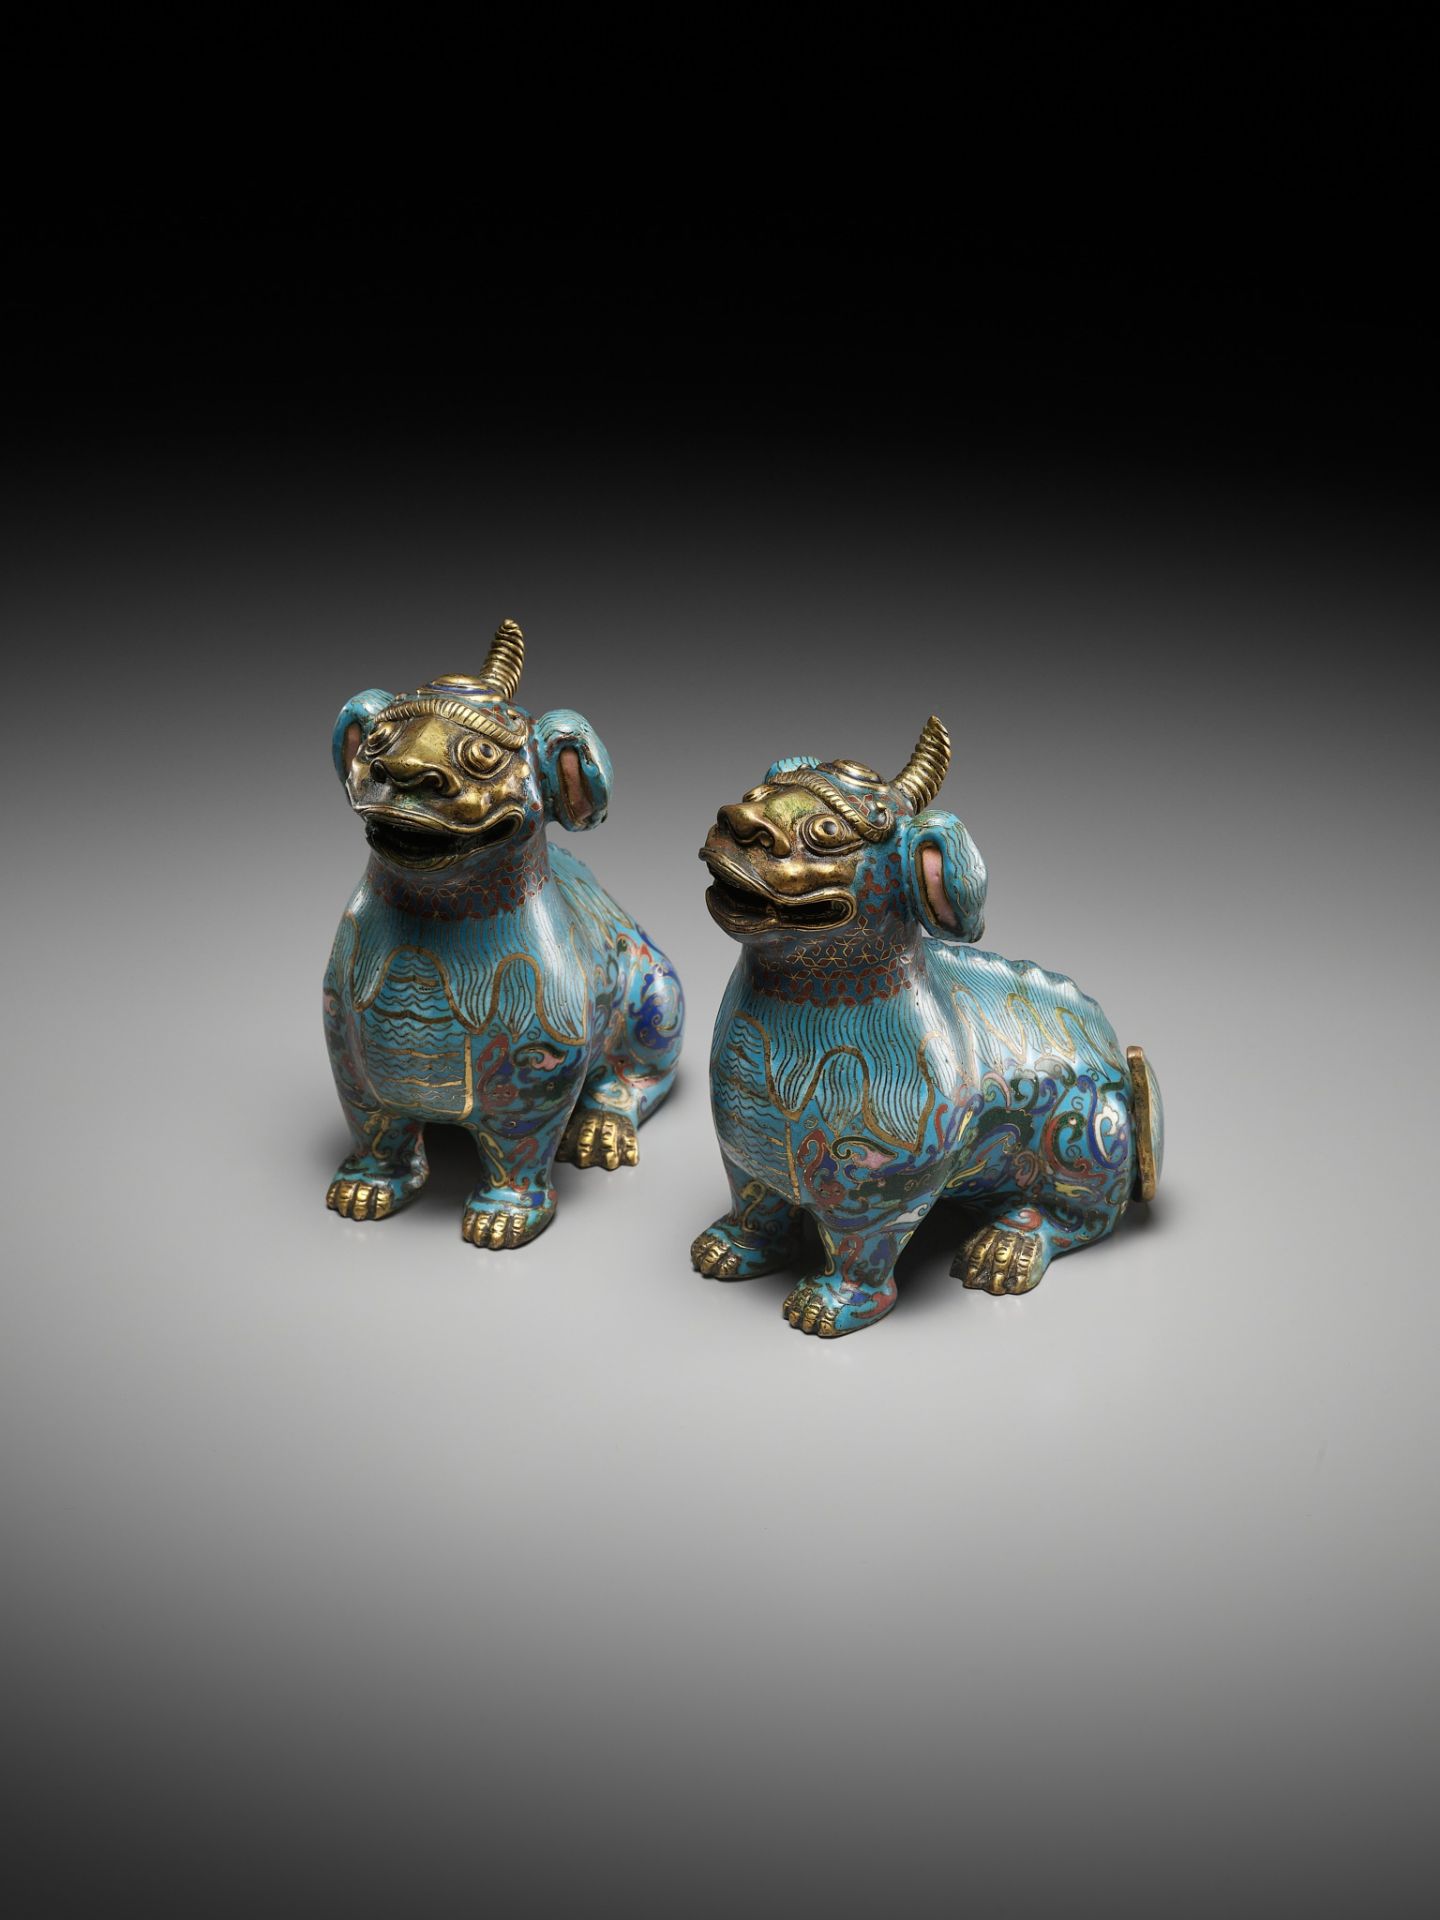 A PAIR OF GILT-BRONZE AND CLOISONNE ENAMEL LUDUAN, CHINA, 18TH - 19TH CENTURY - Image 3 of 11